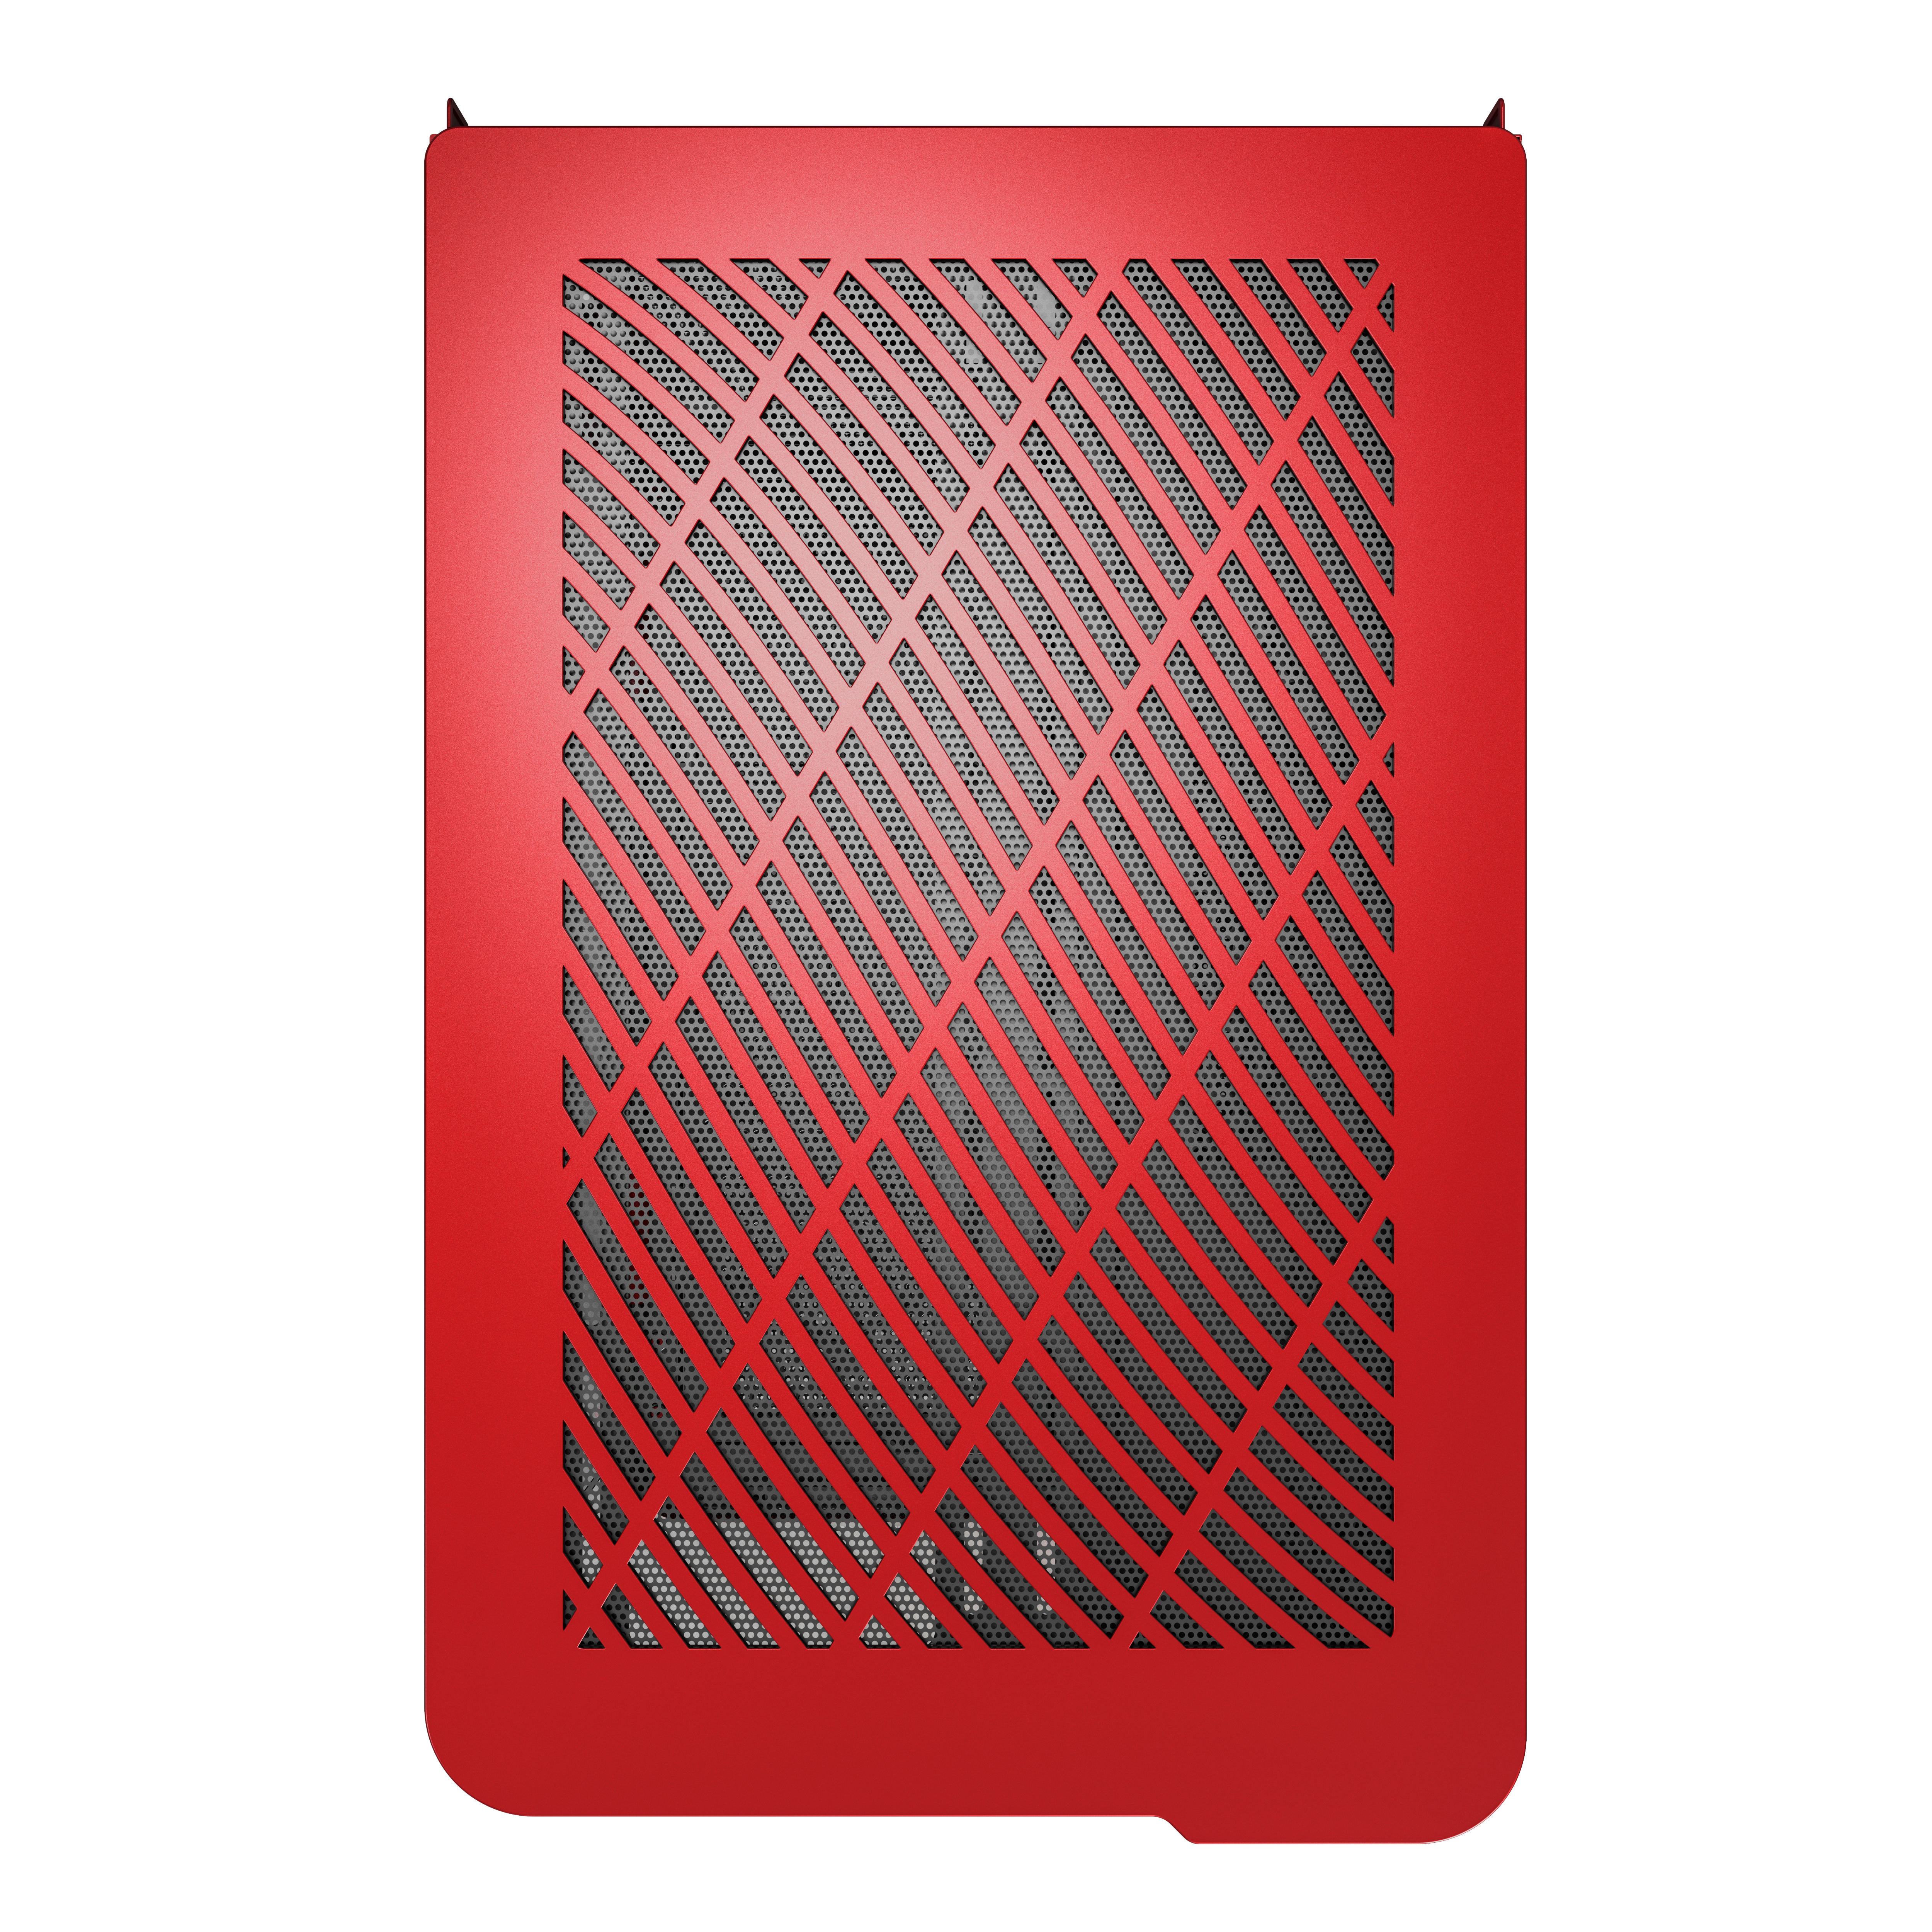 montech - Montech KING 95 Midi-Tower, Tempered Glass, ARGB - Red